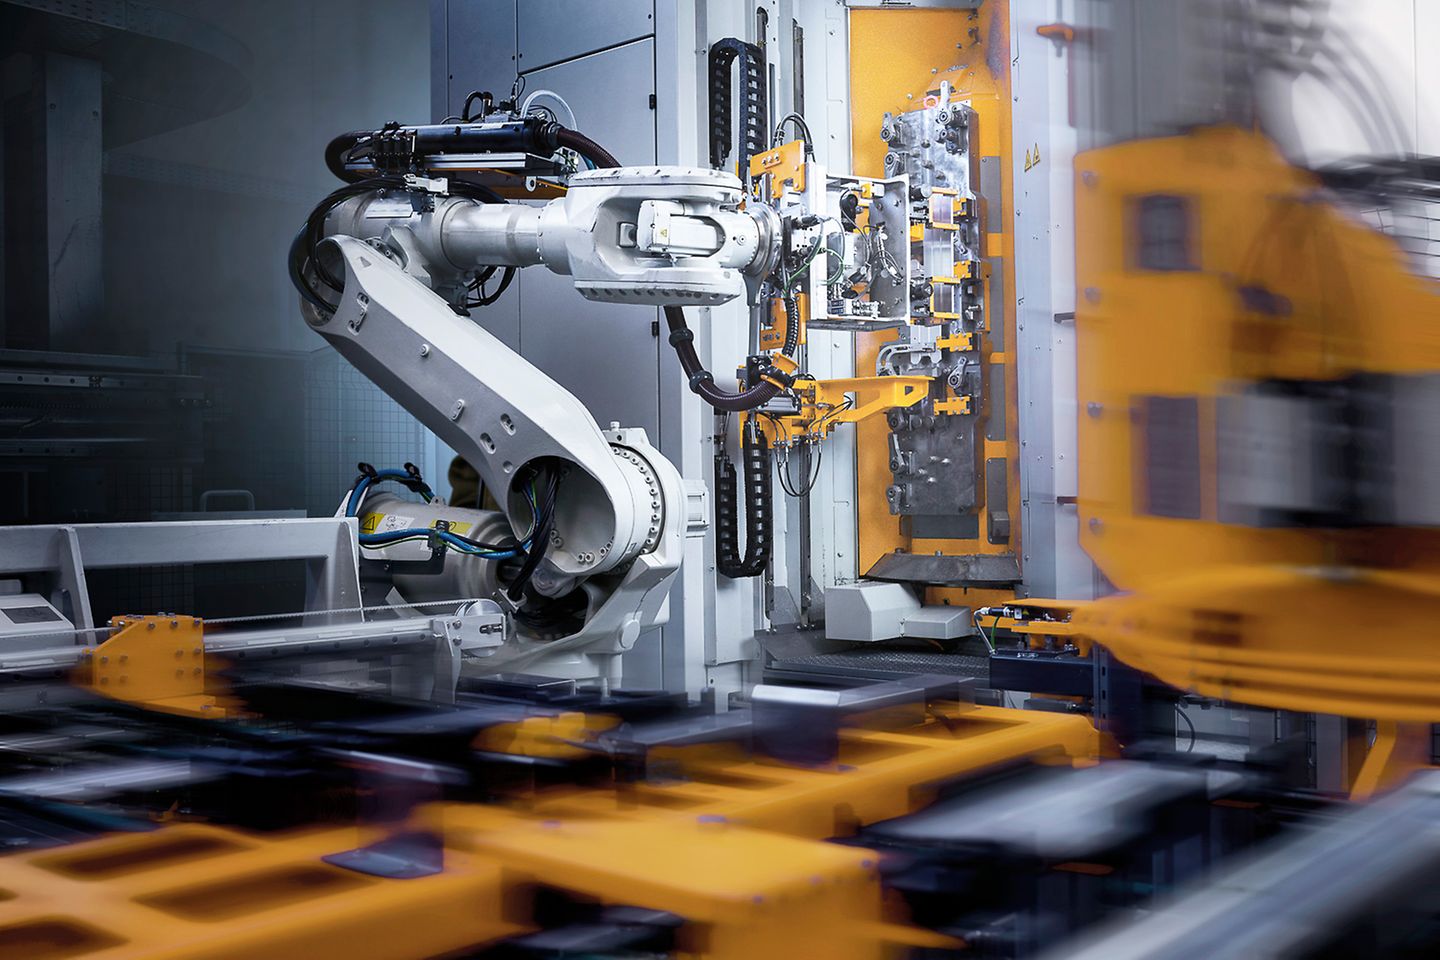 Working industrial robot in a digitized factory